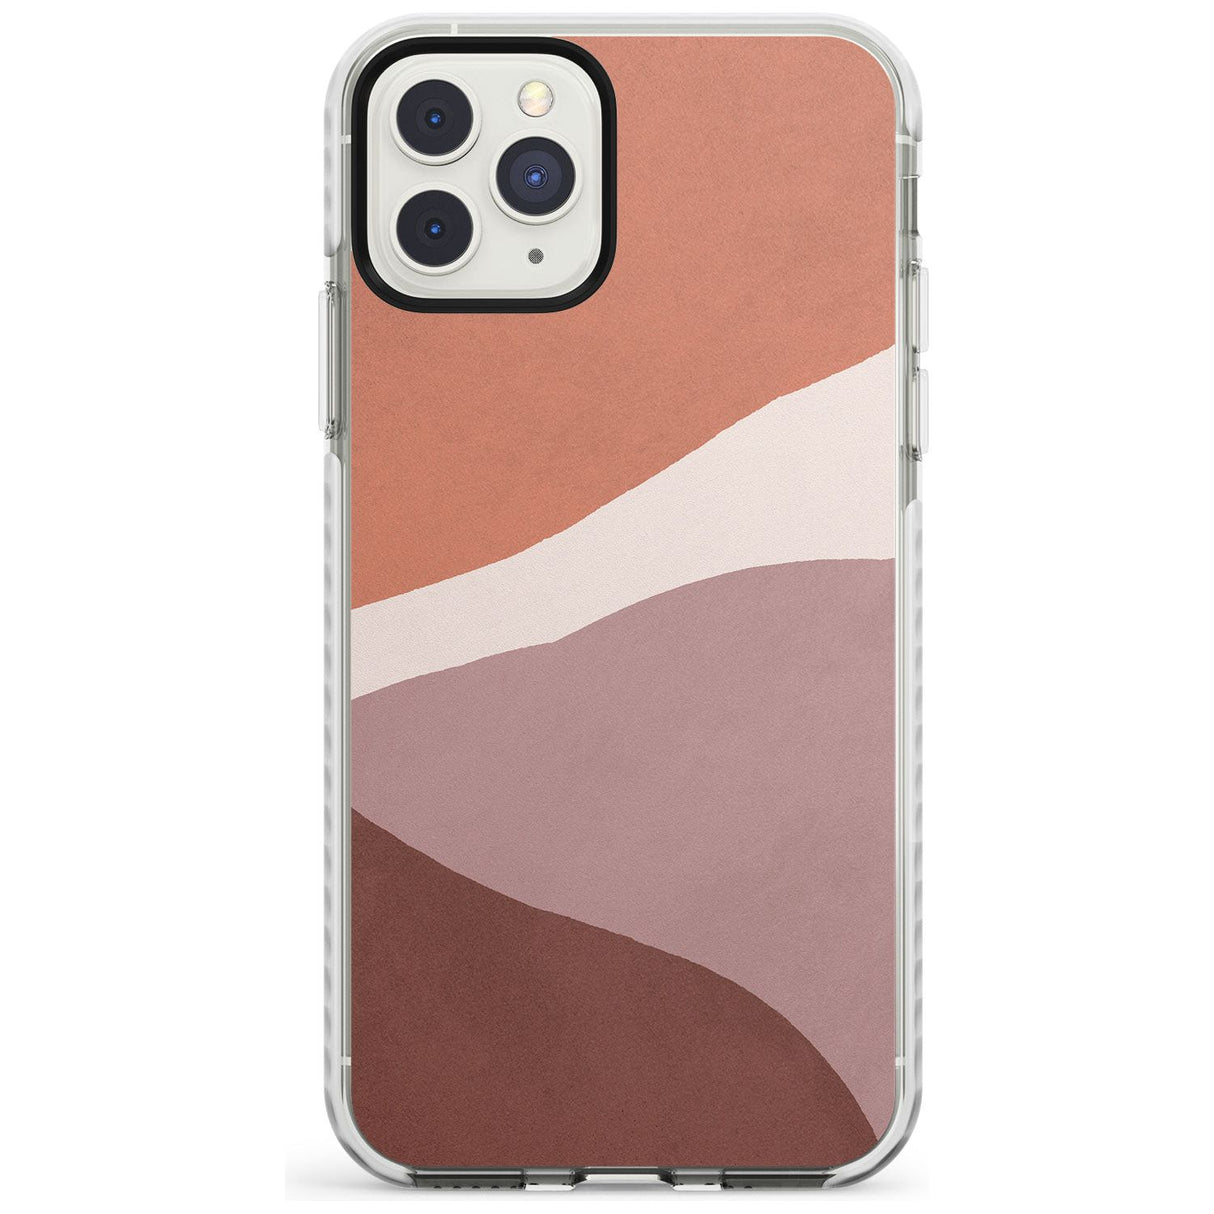 Lush Abstract Watercolour Design #2 Phone Case iPhone 11 Pro Max / Impact Case,iPhone 11 Pro / Impact Case,iPhone 12 Pro / Impact Case,iPhone 12 Pro Max / Impact Case Blanc Space